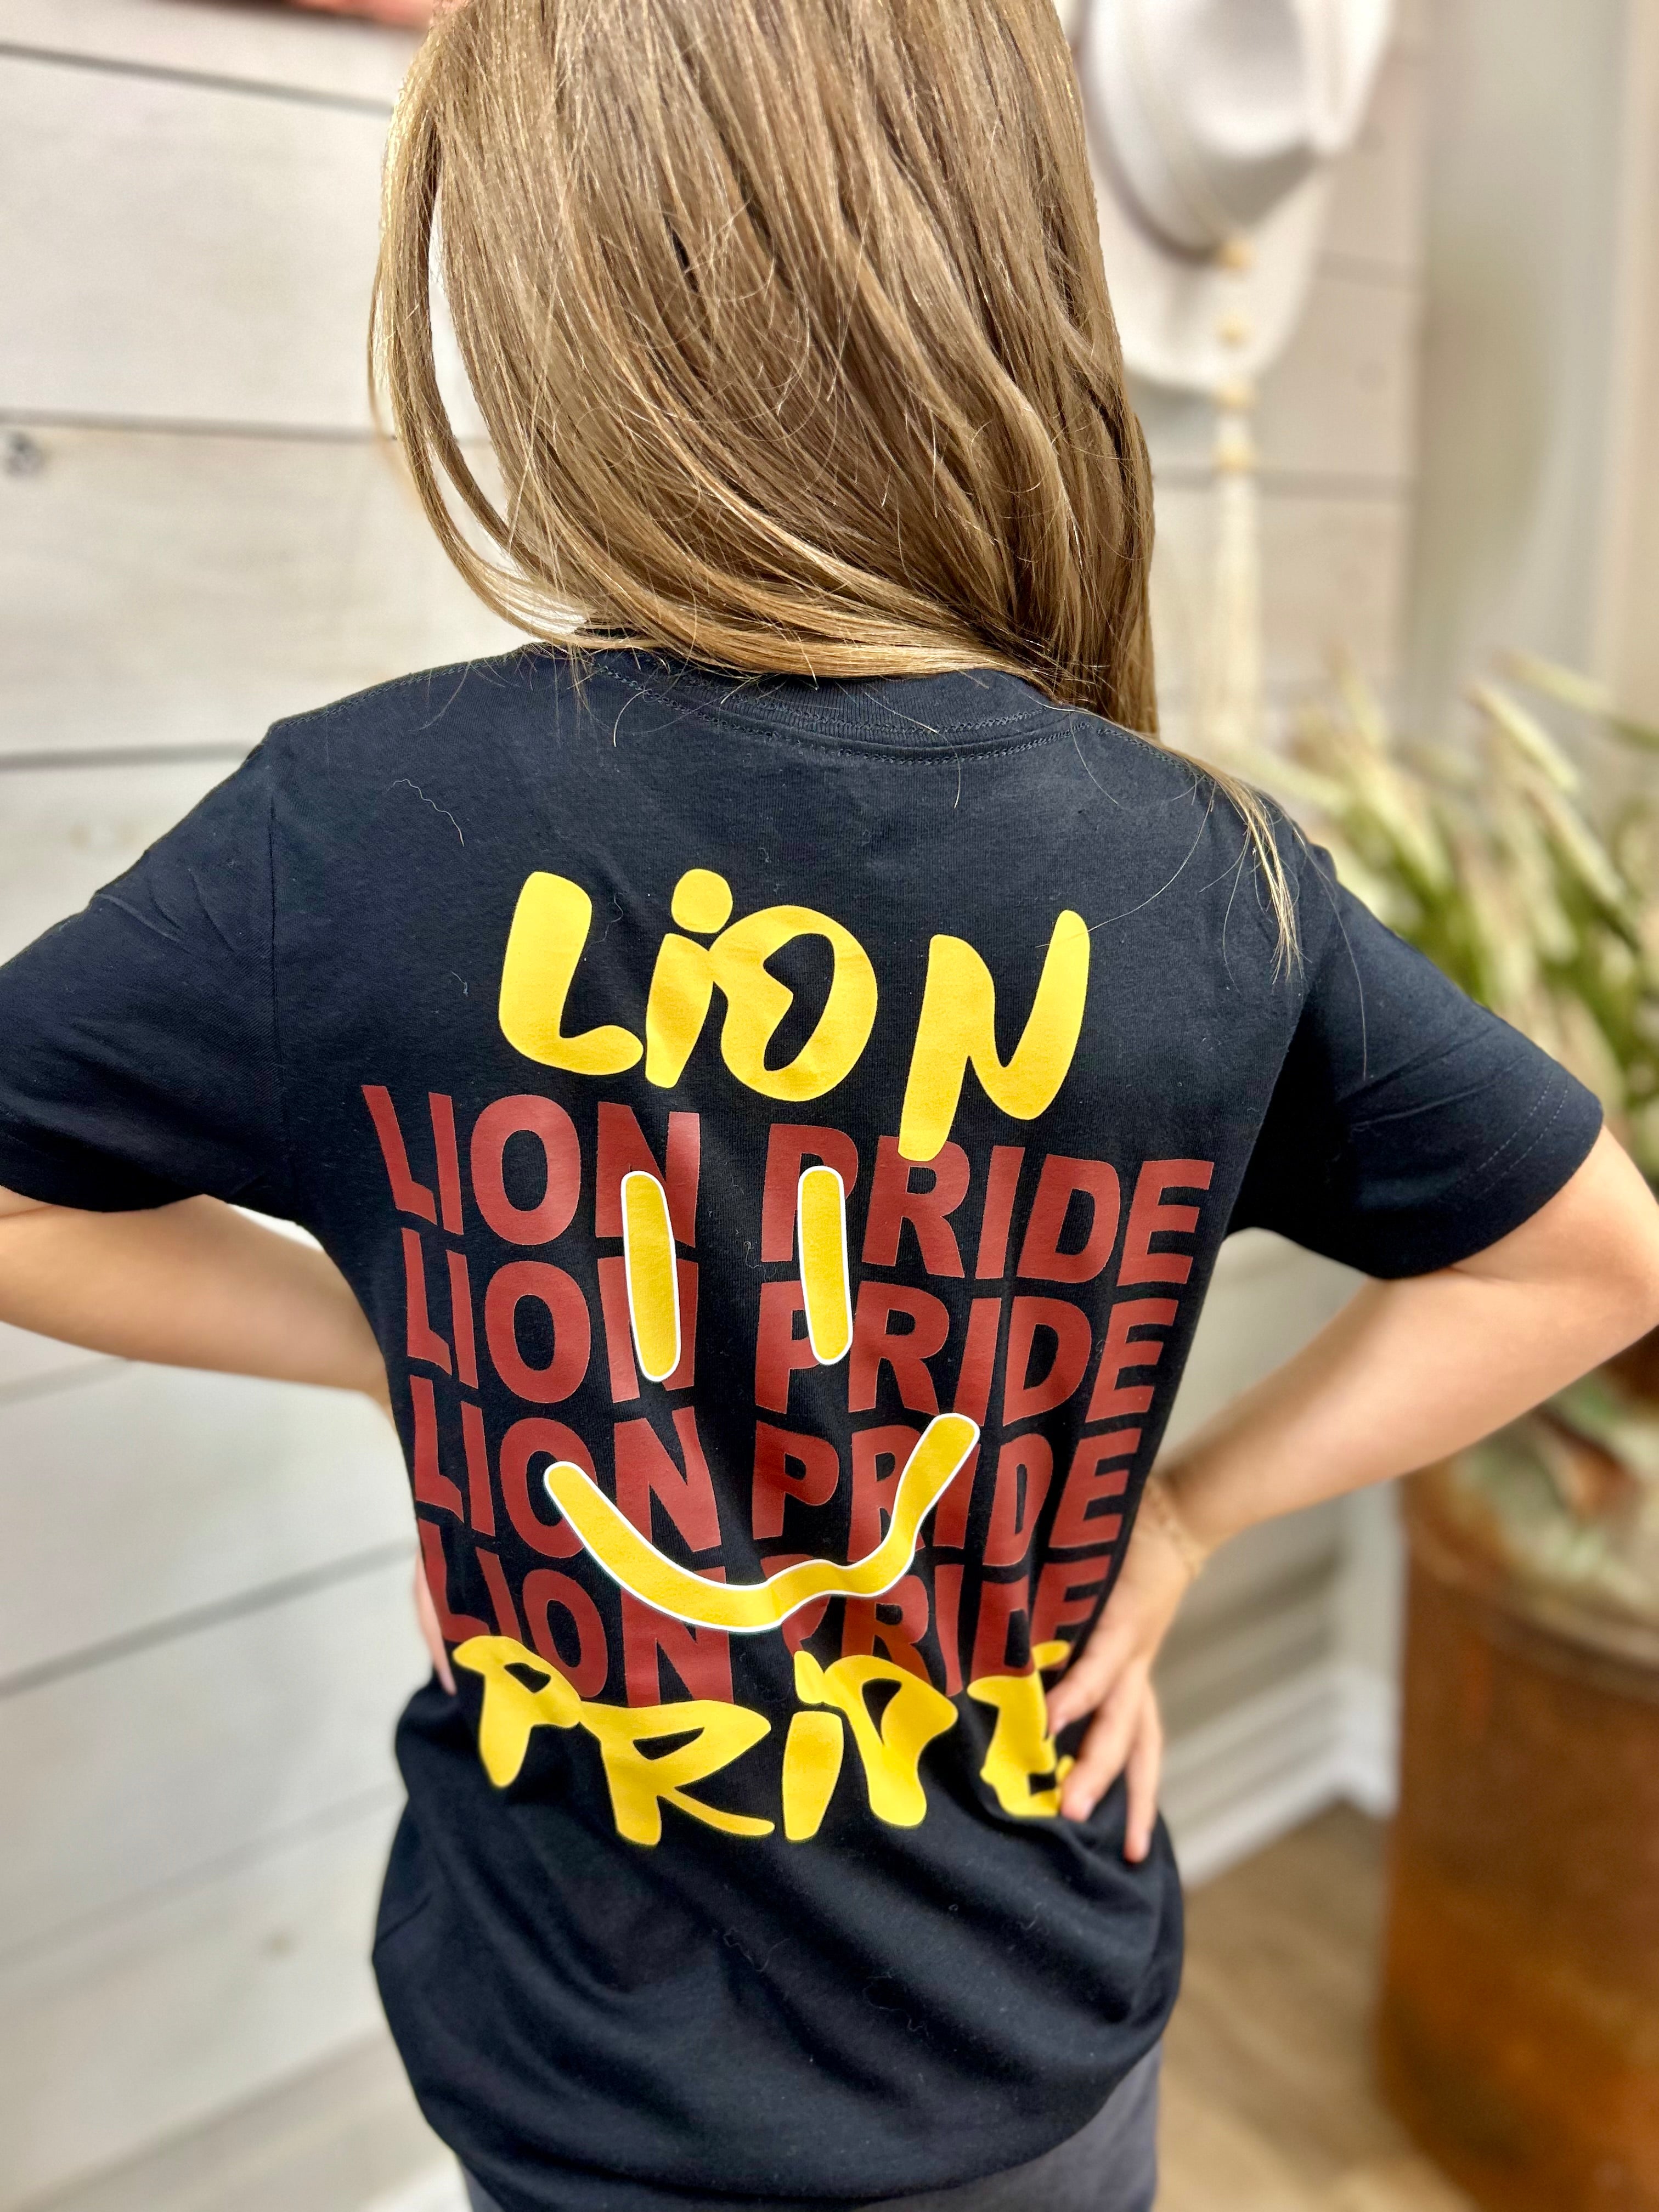 Youth Lions Pride Short sleeved